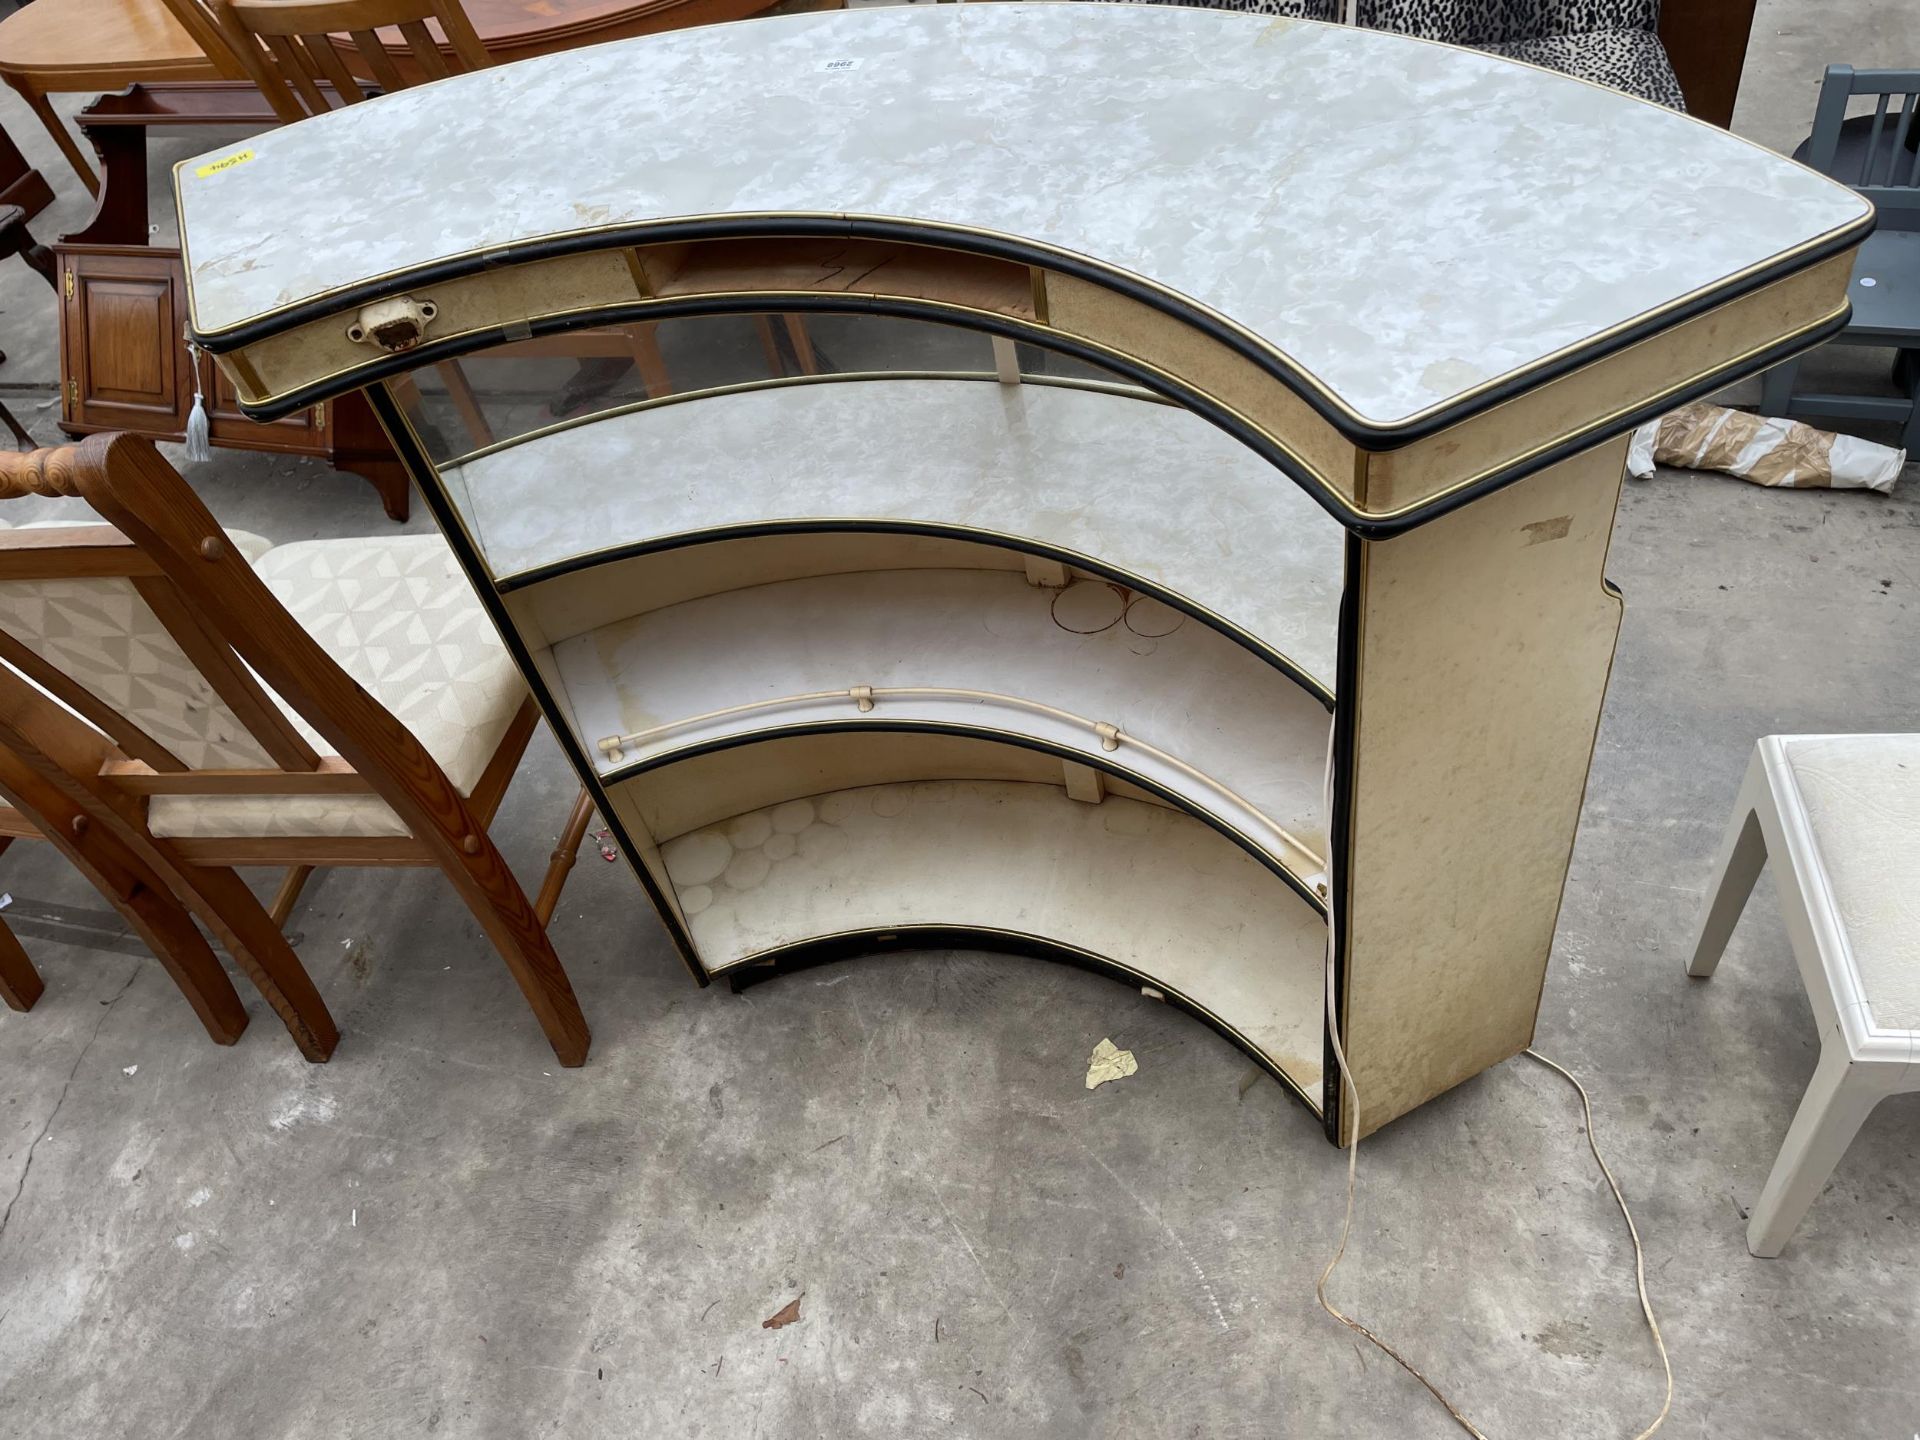 A MID 20TH CENTURY CRESENT SHAPED COCKTAIL COUNTER/BAR - Image 3 of 3